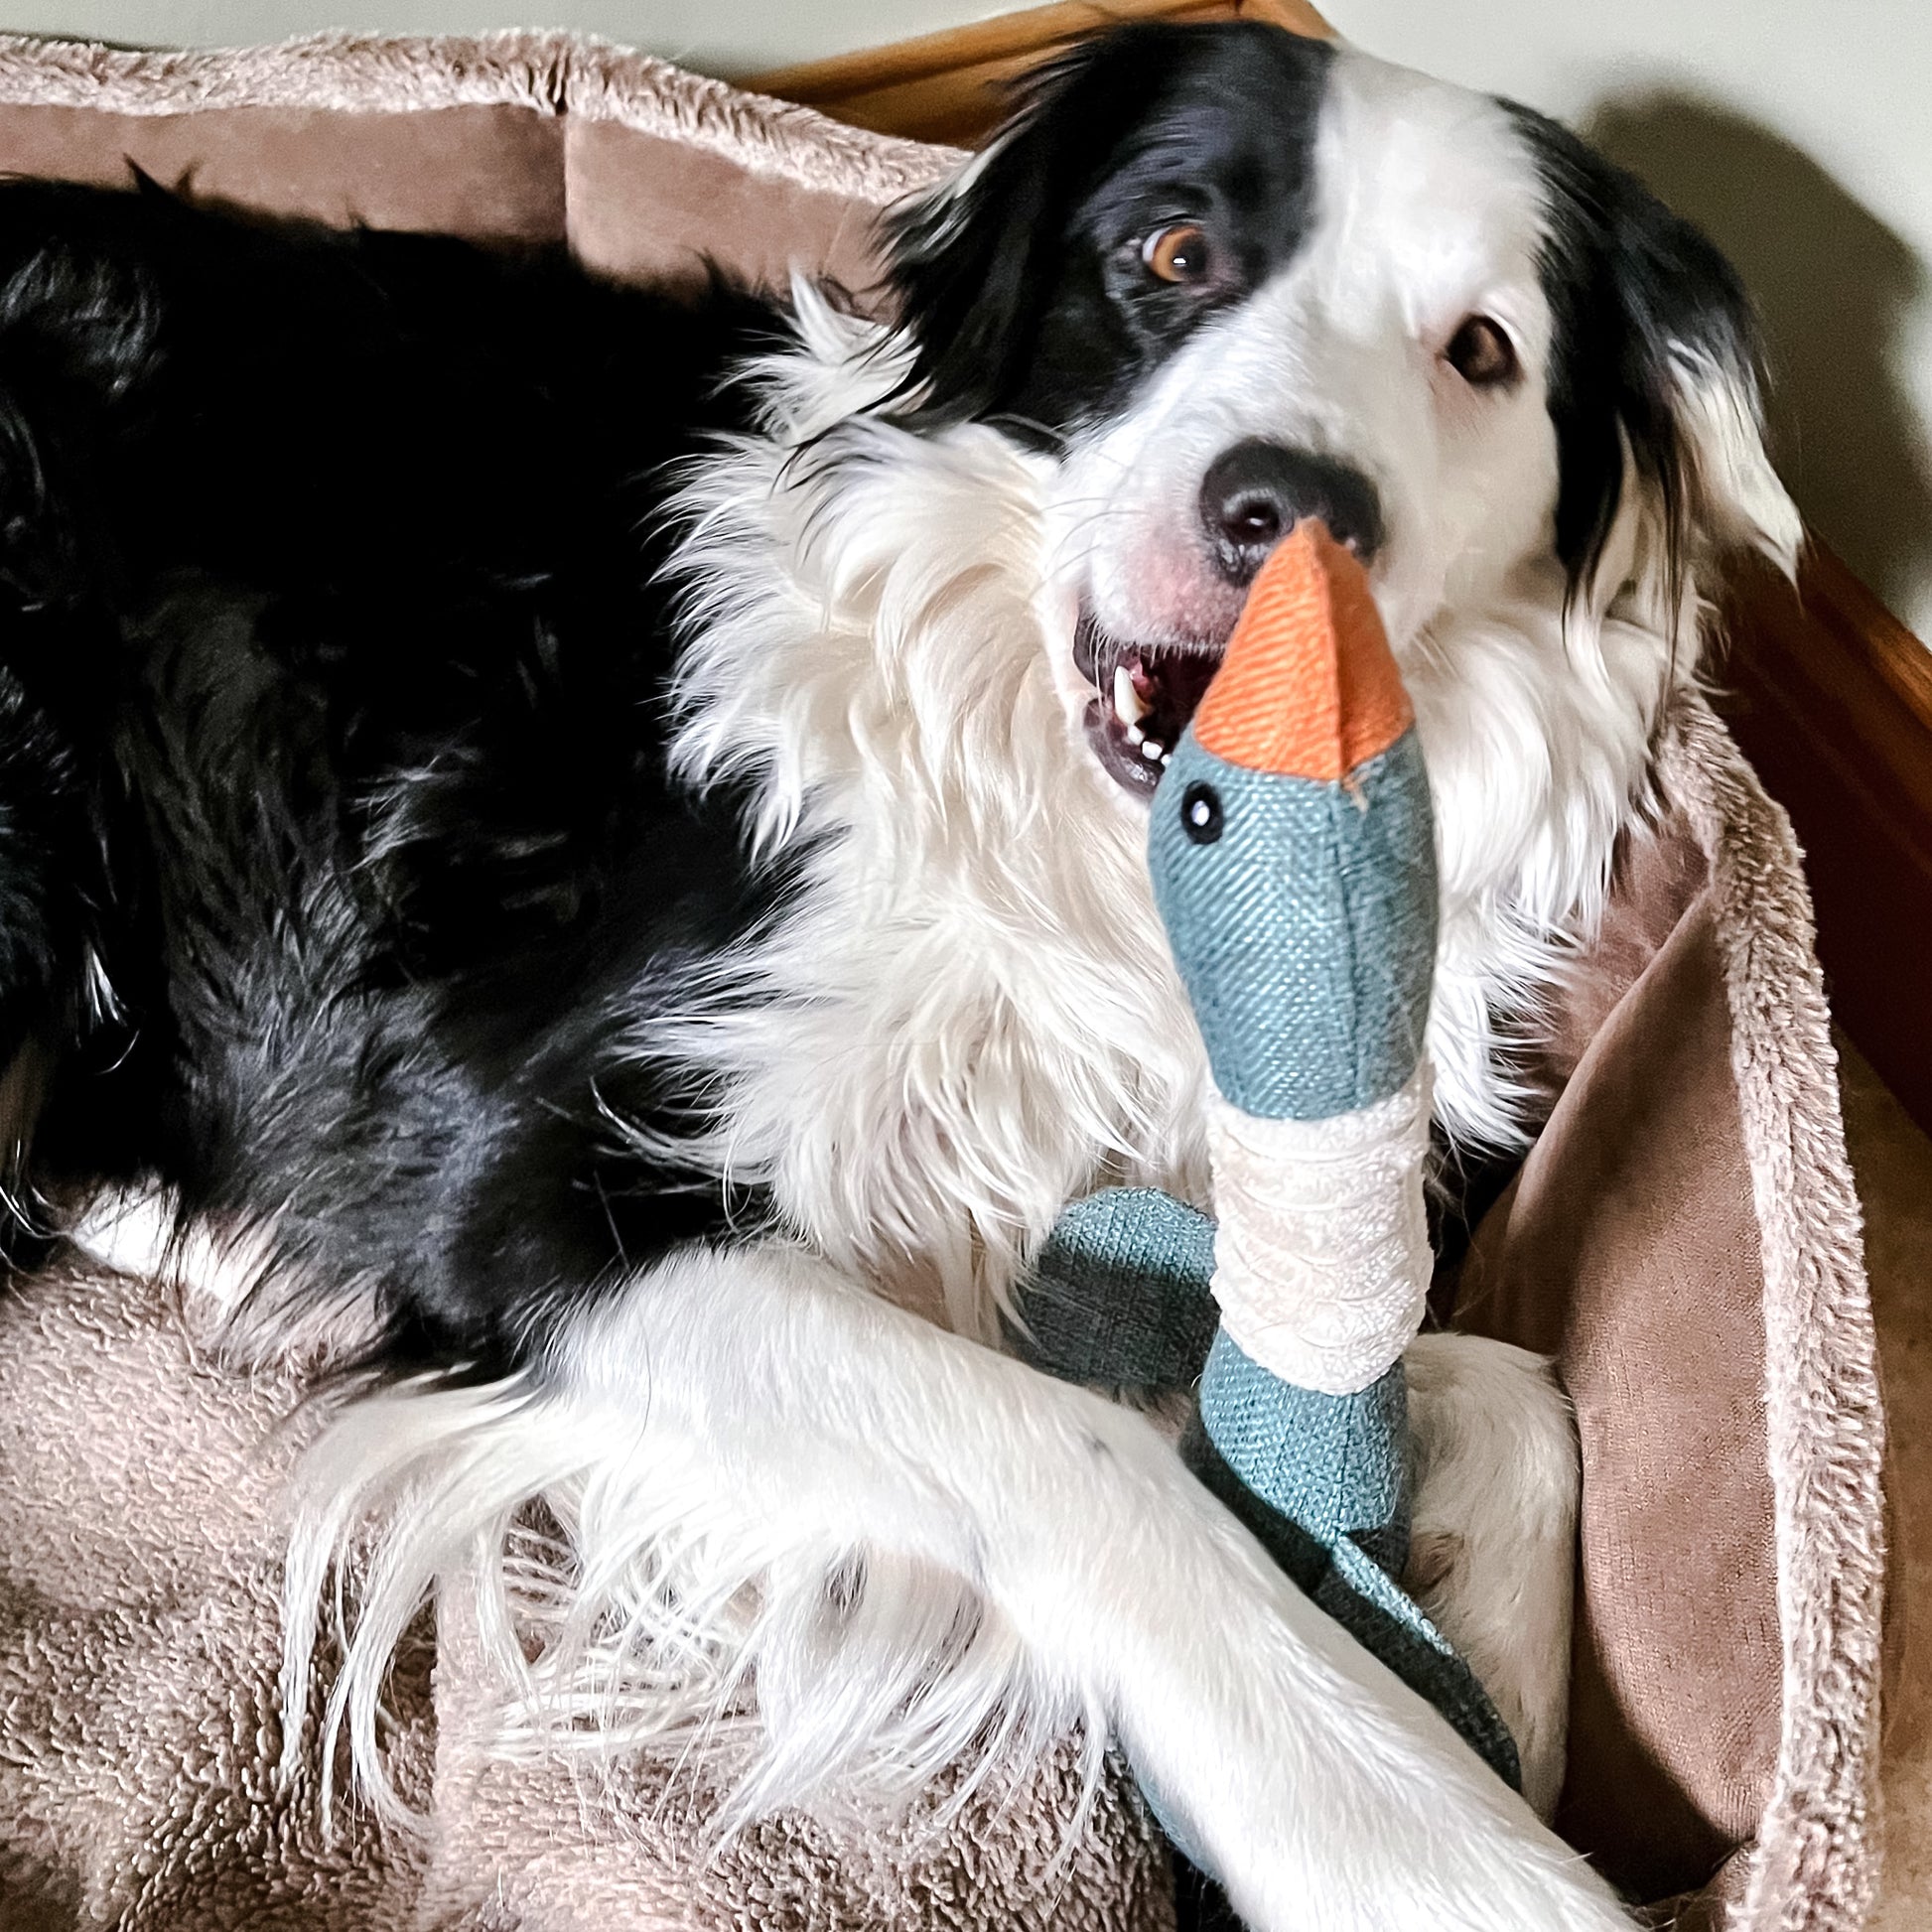 squeaky duck dog toy gift by Border Loves with border collie